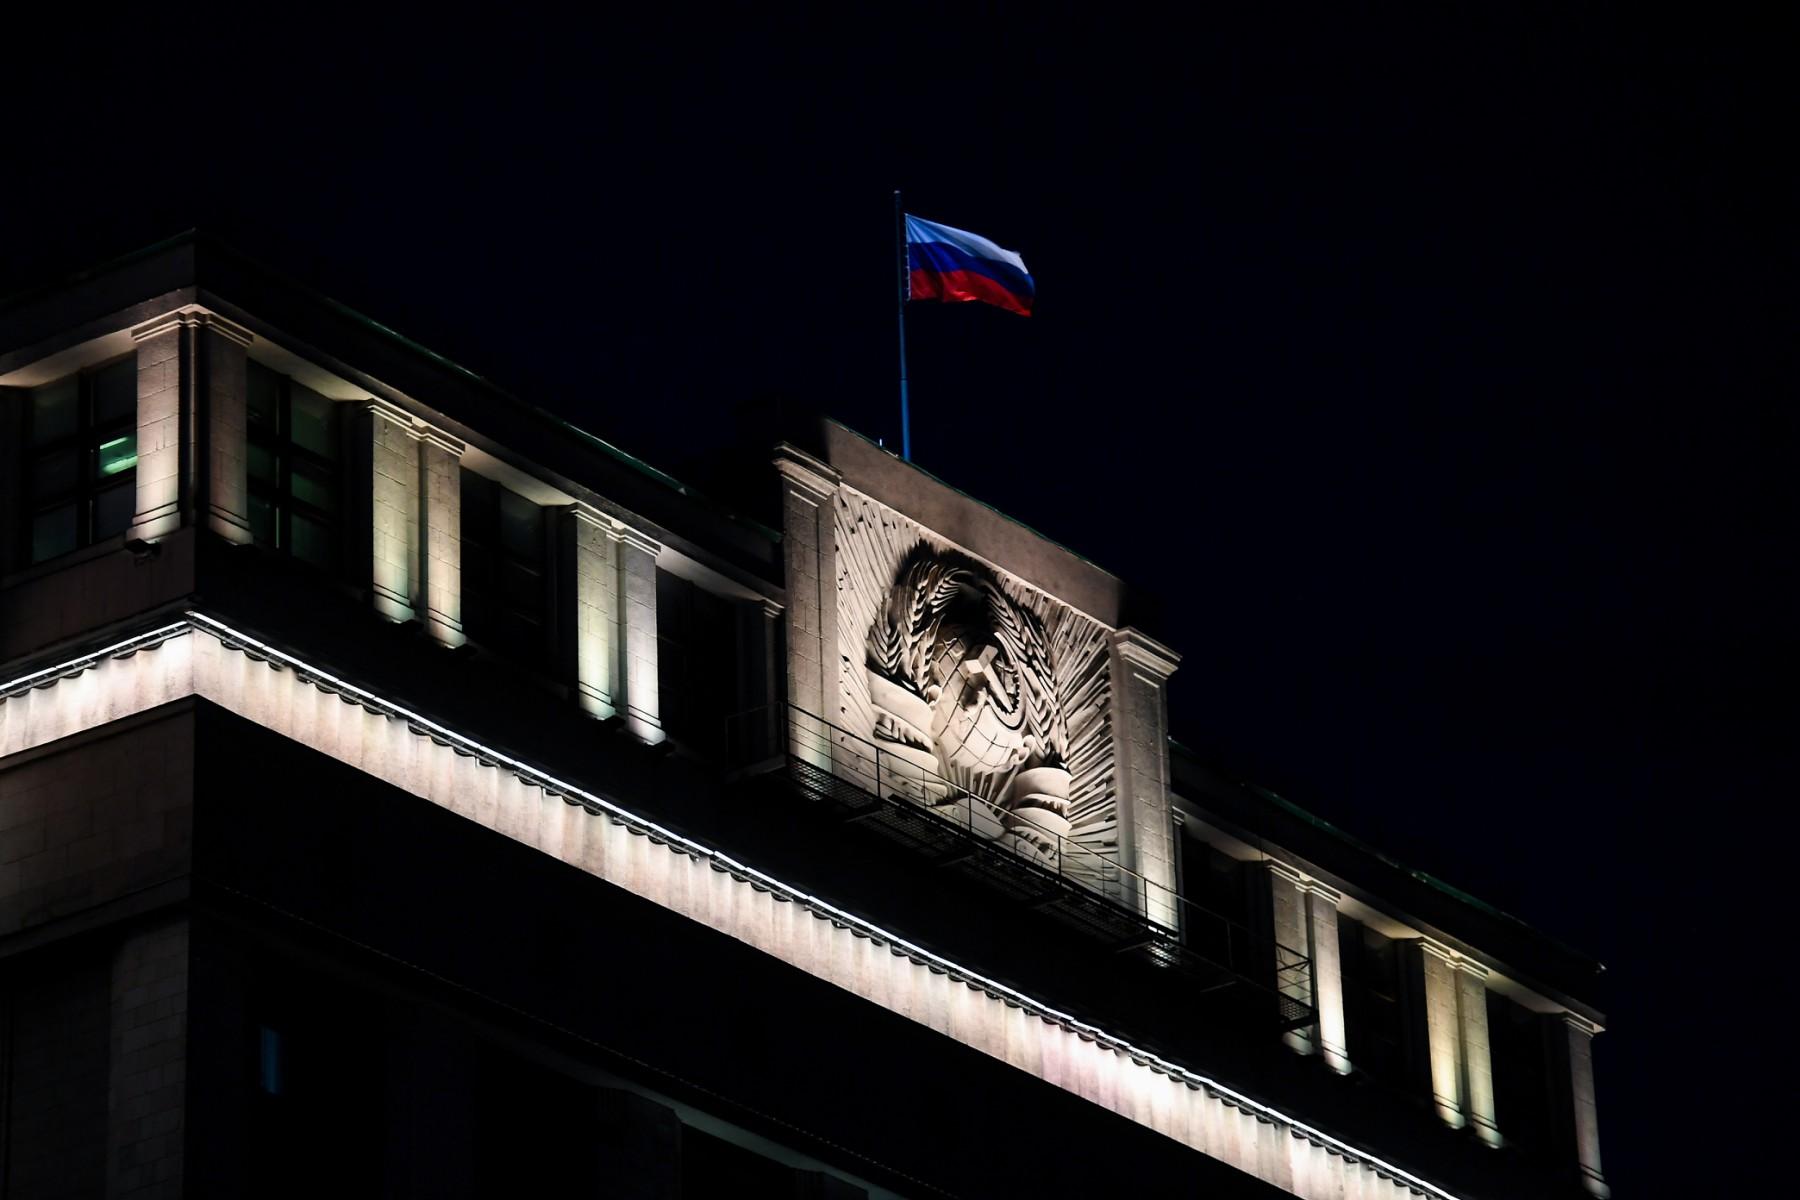 The Russian national tricolour flag flutters on top of the building of the State Duma, the lower chamber of Russia's parliament, in central Moscow in the evening of March 3. Photo: AFP